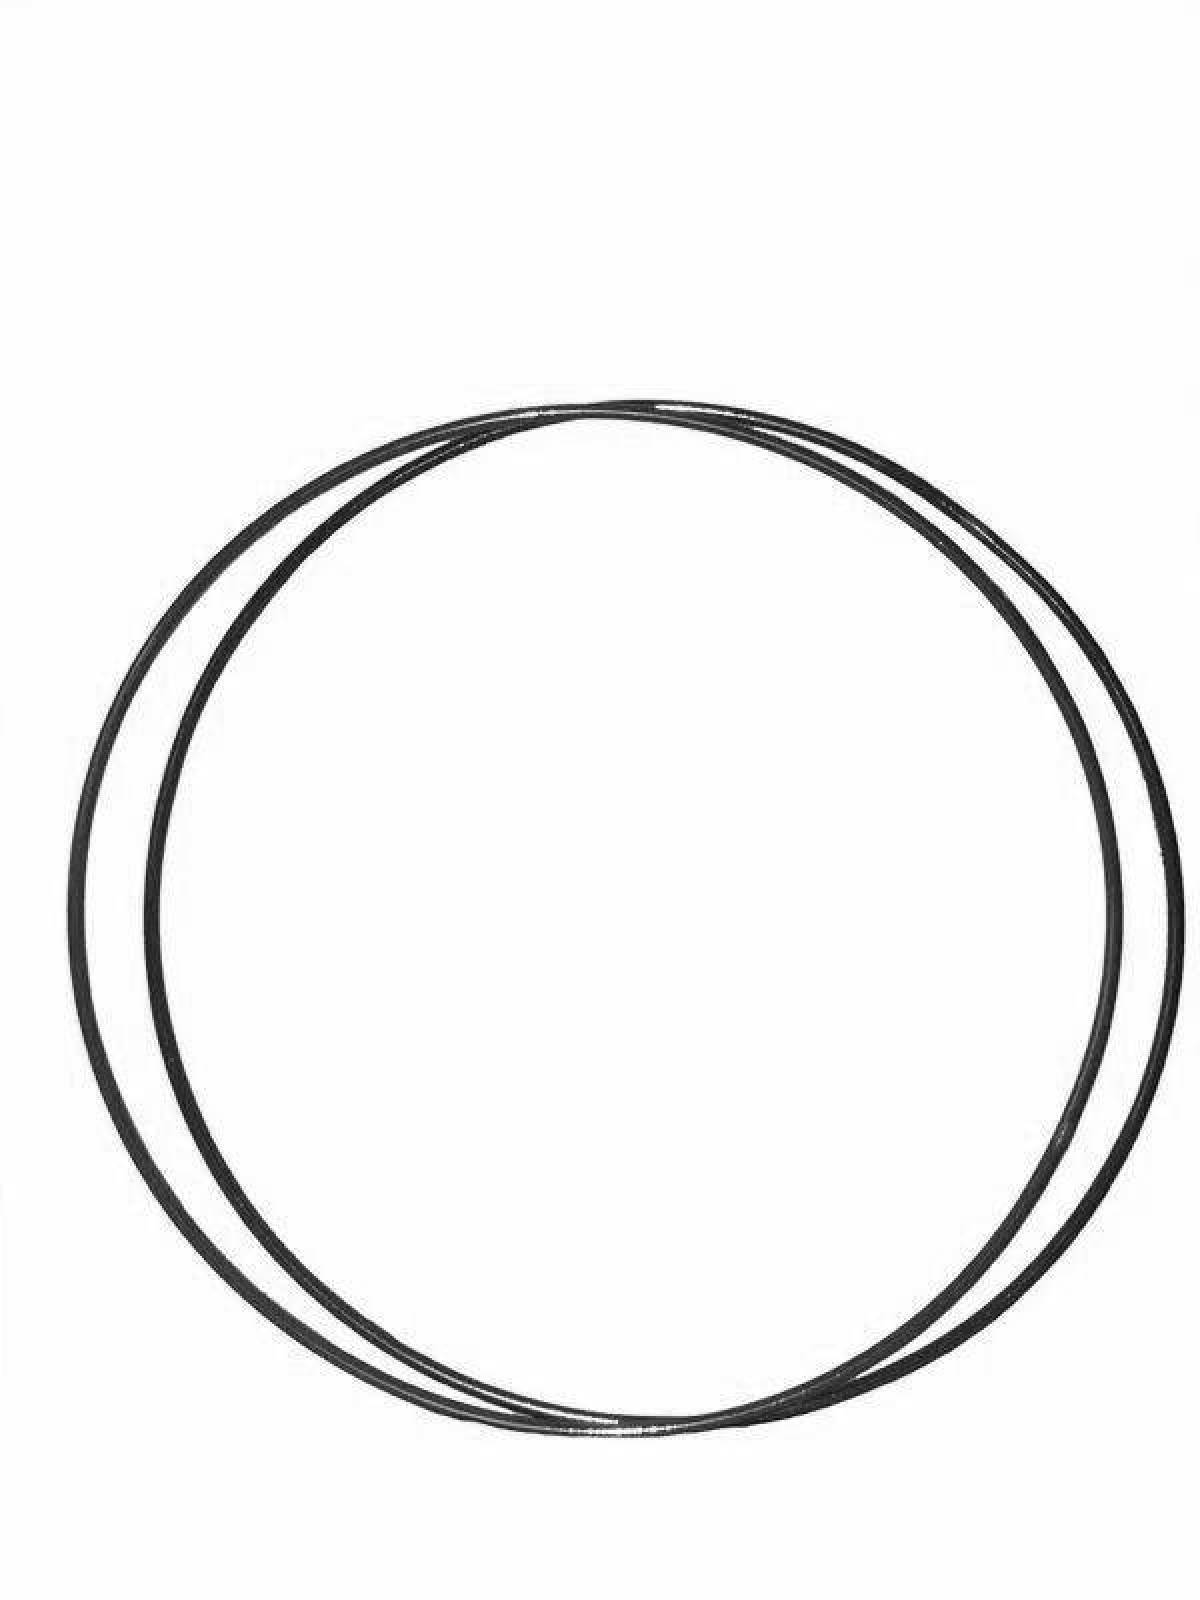 Coloring page with dynamic hoop